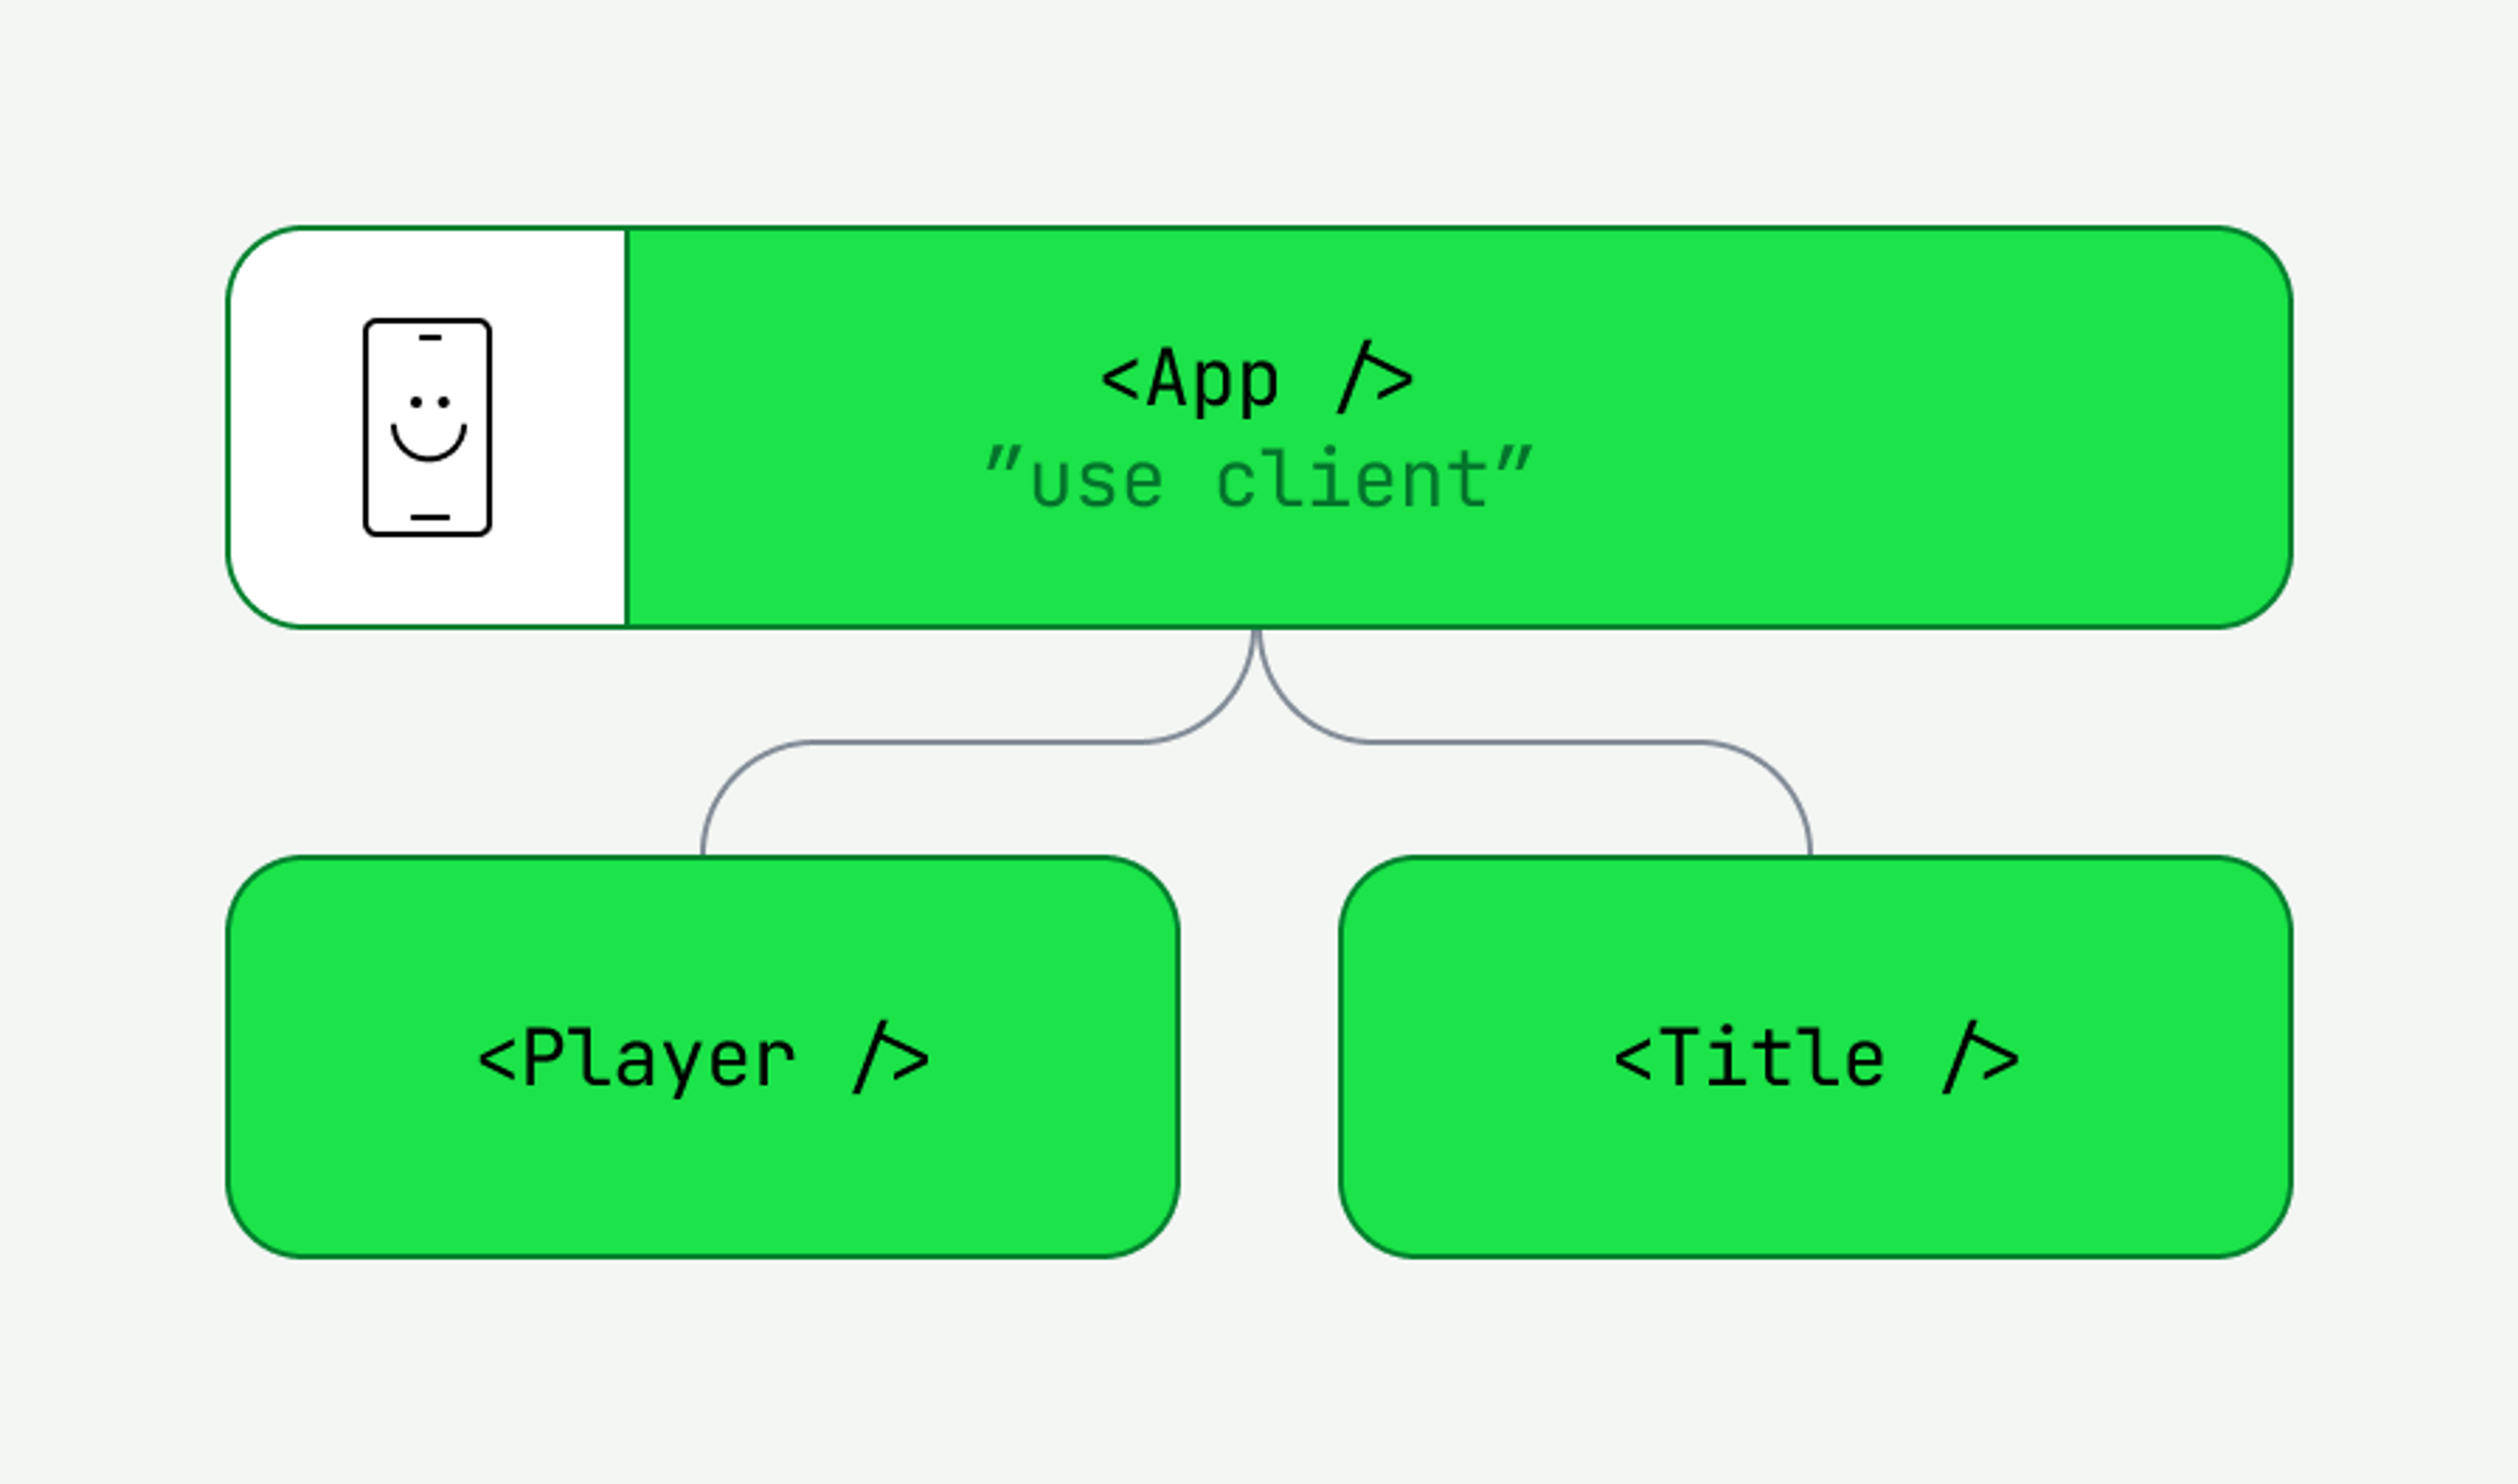 By adding “use client” to the root of our app, our app gets converted into Client Components. It now functions just like an SSR application.